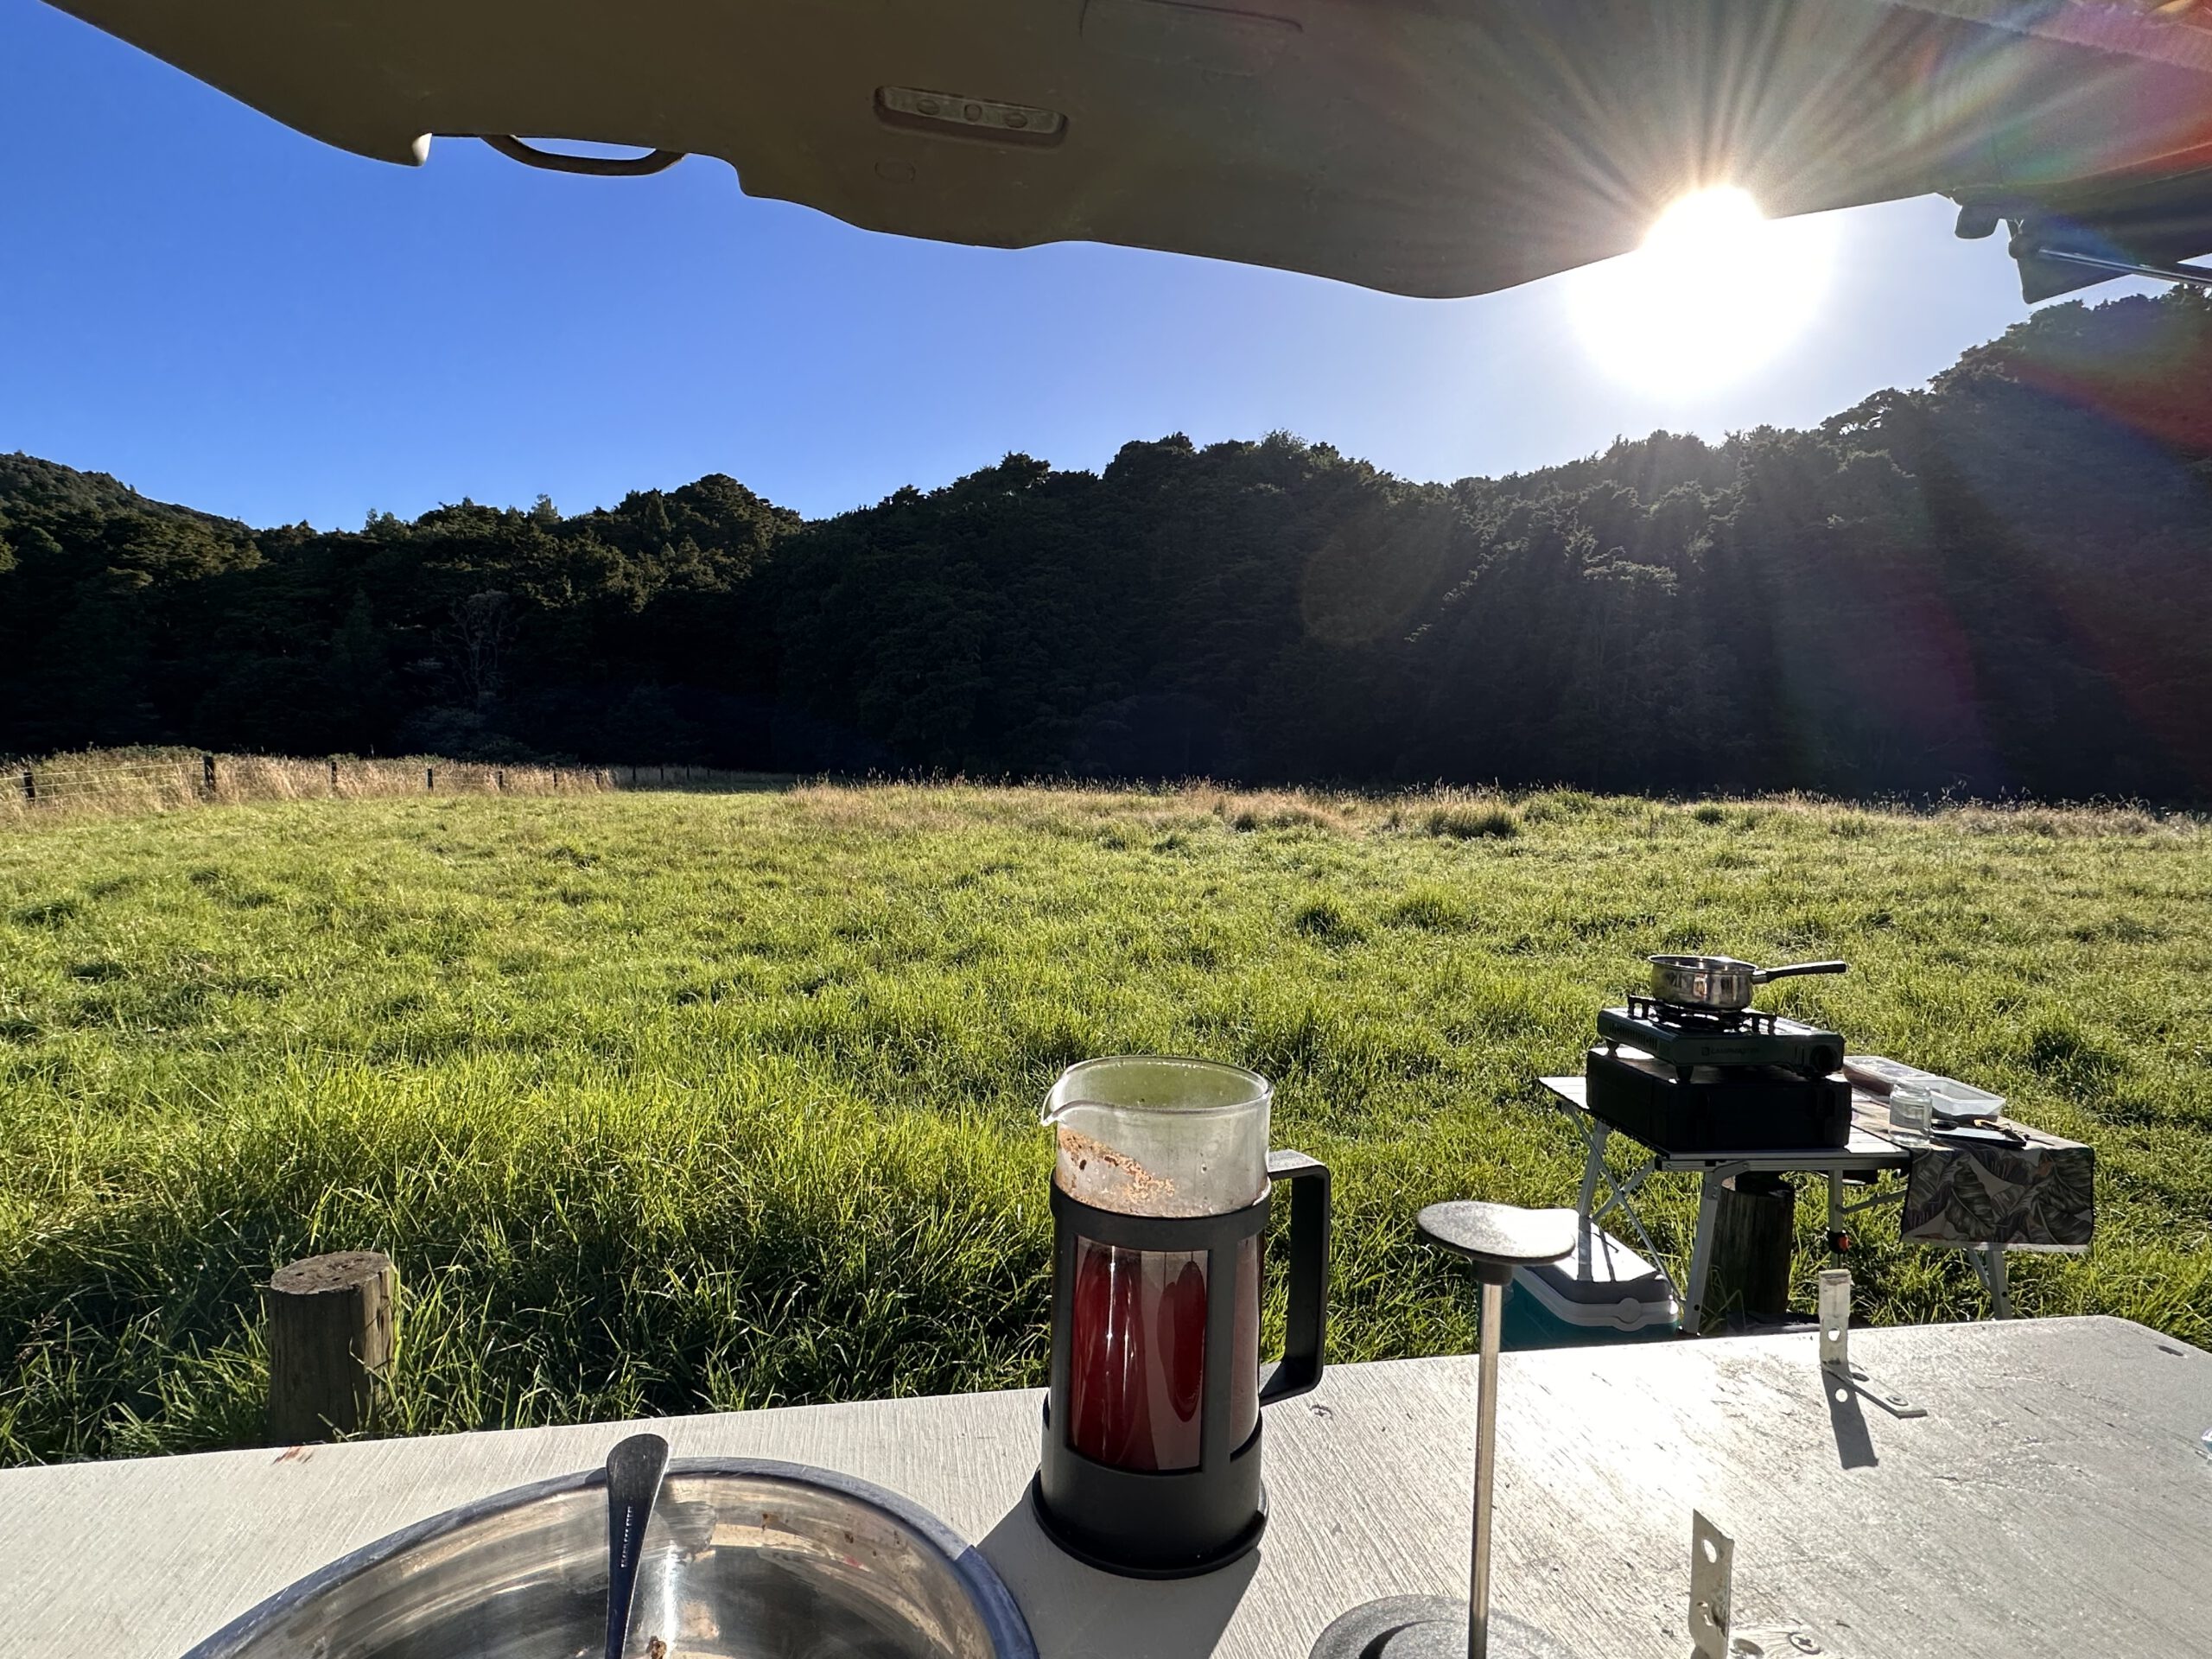 Making a cup of coffee in the back of my campervan in New Zealand